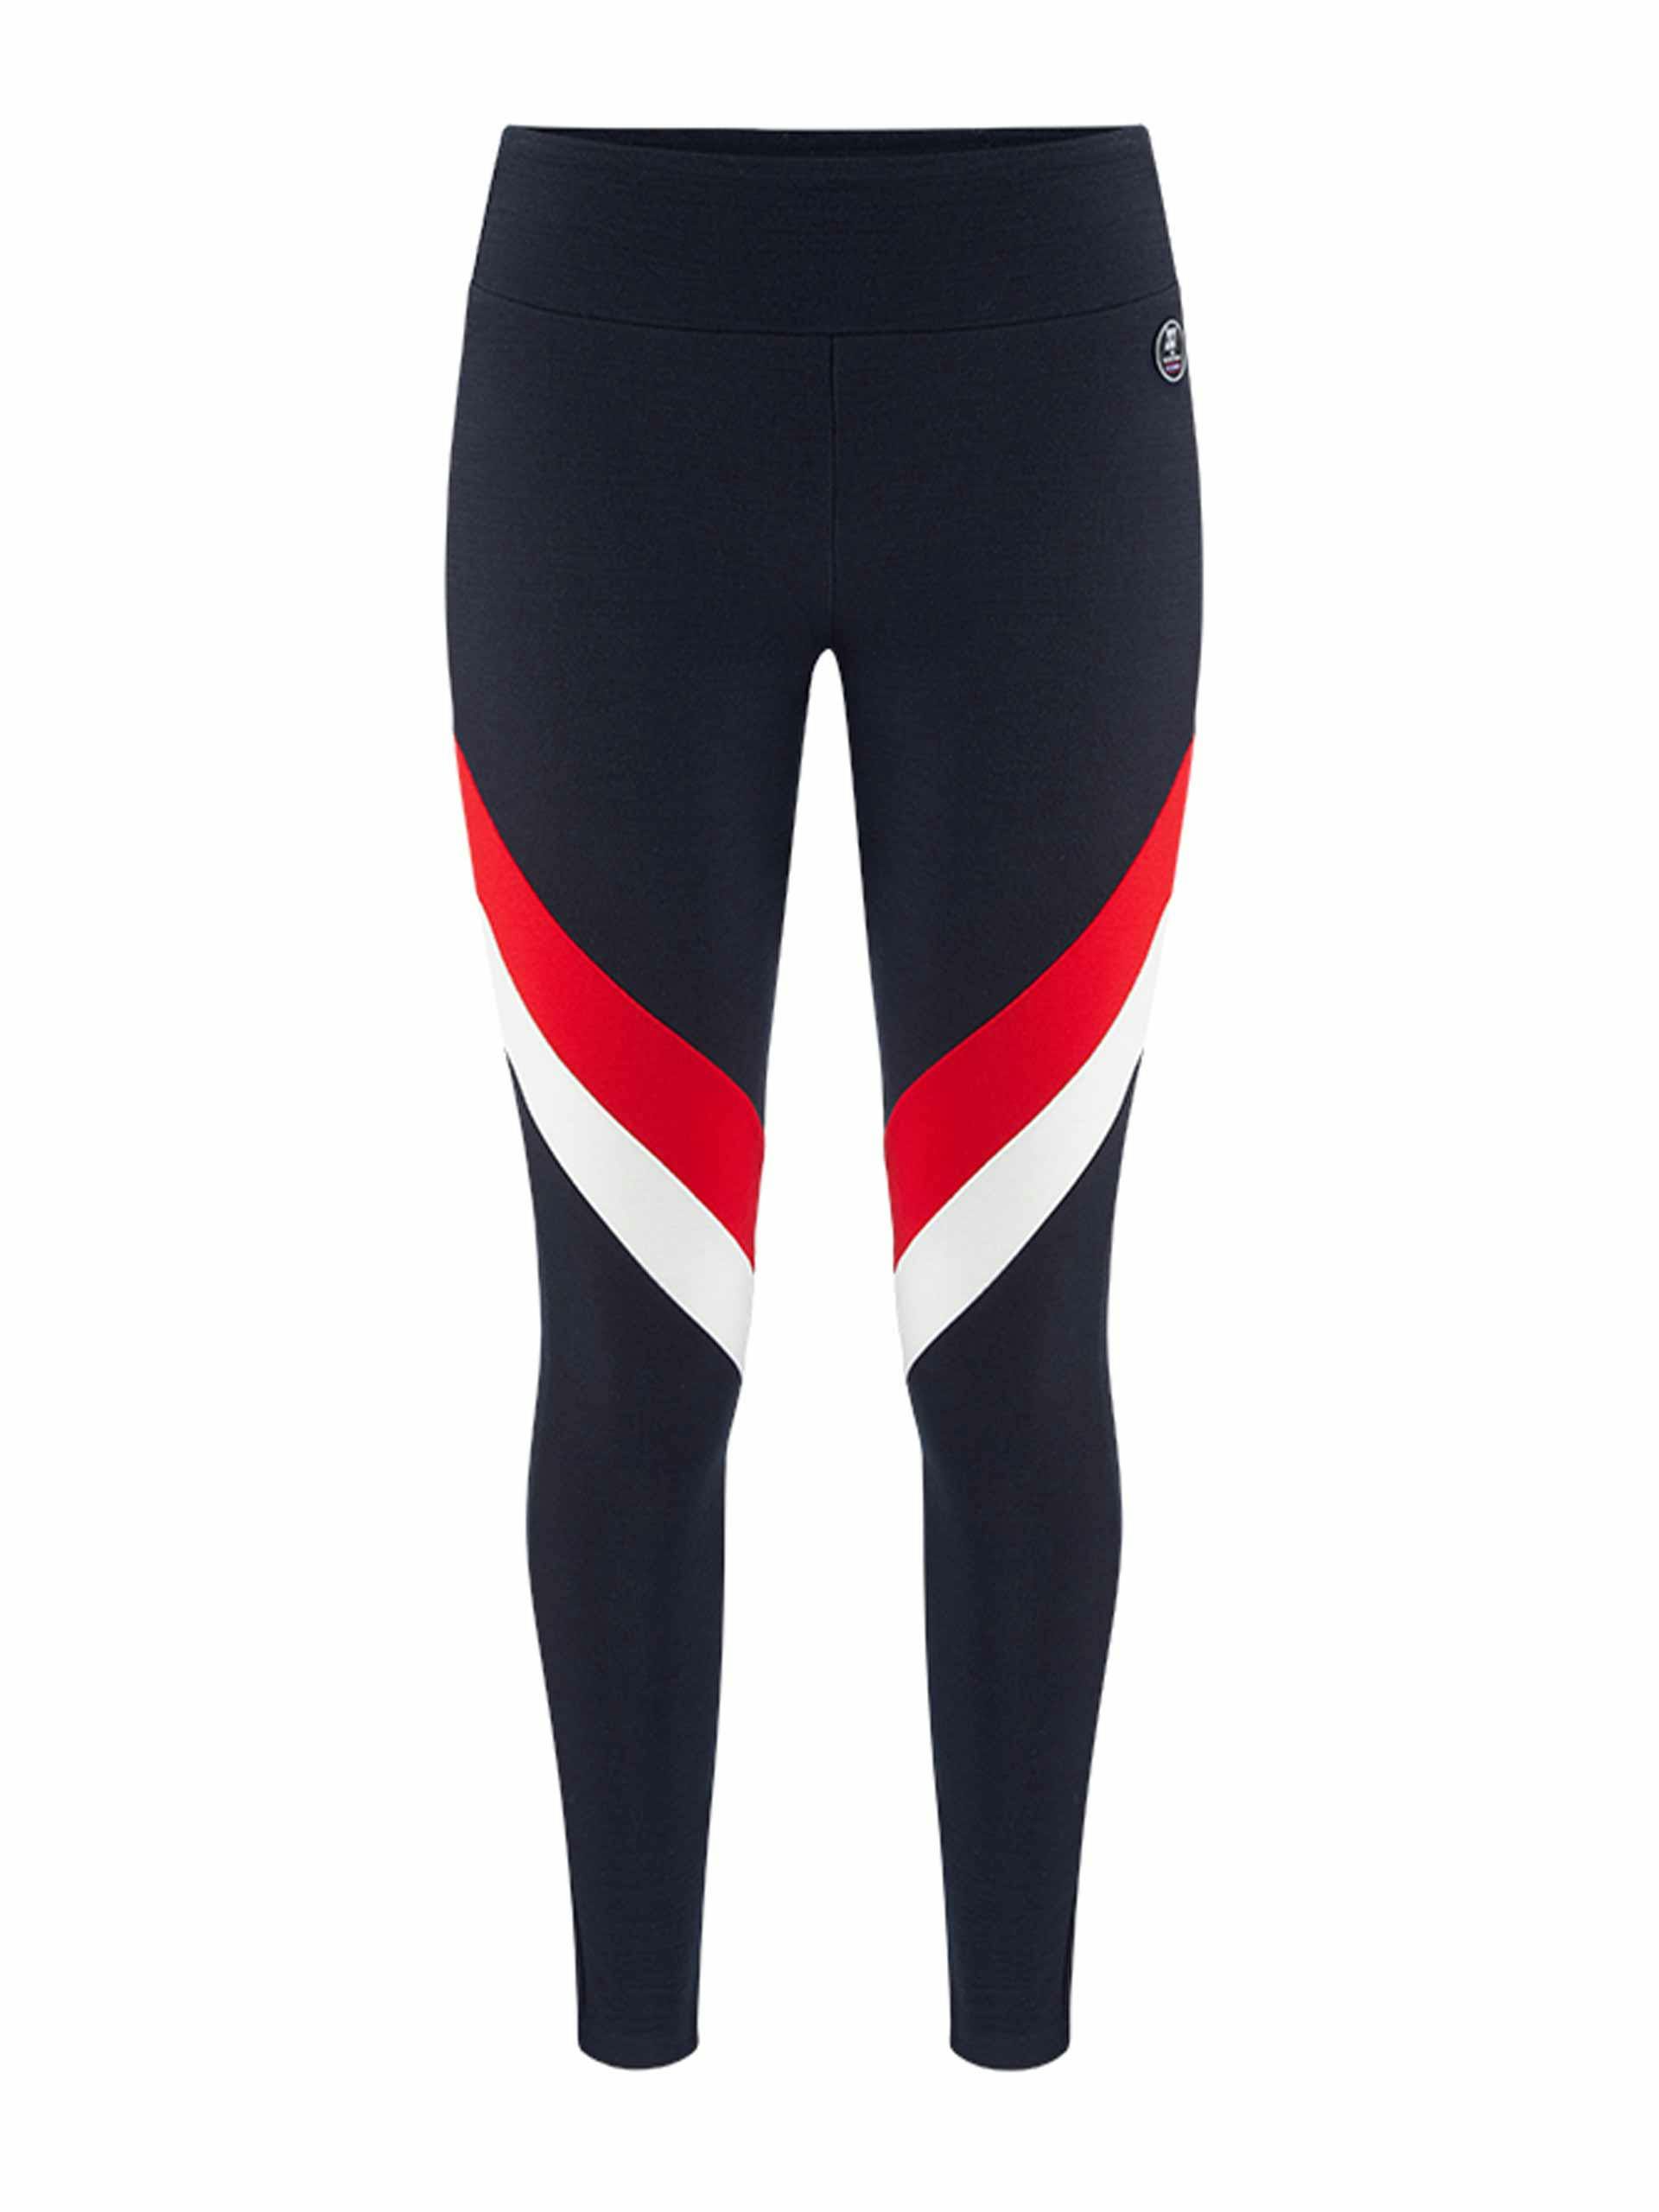 Navy, white and red leggings